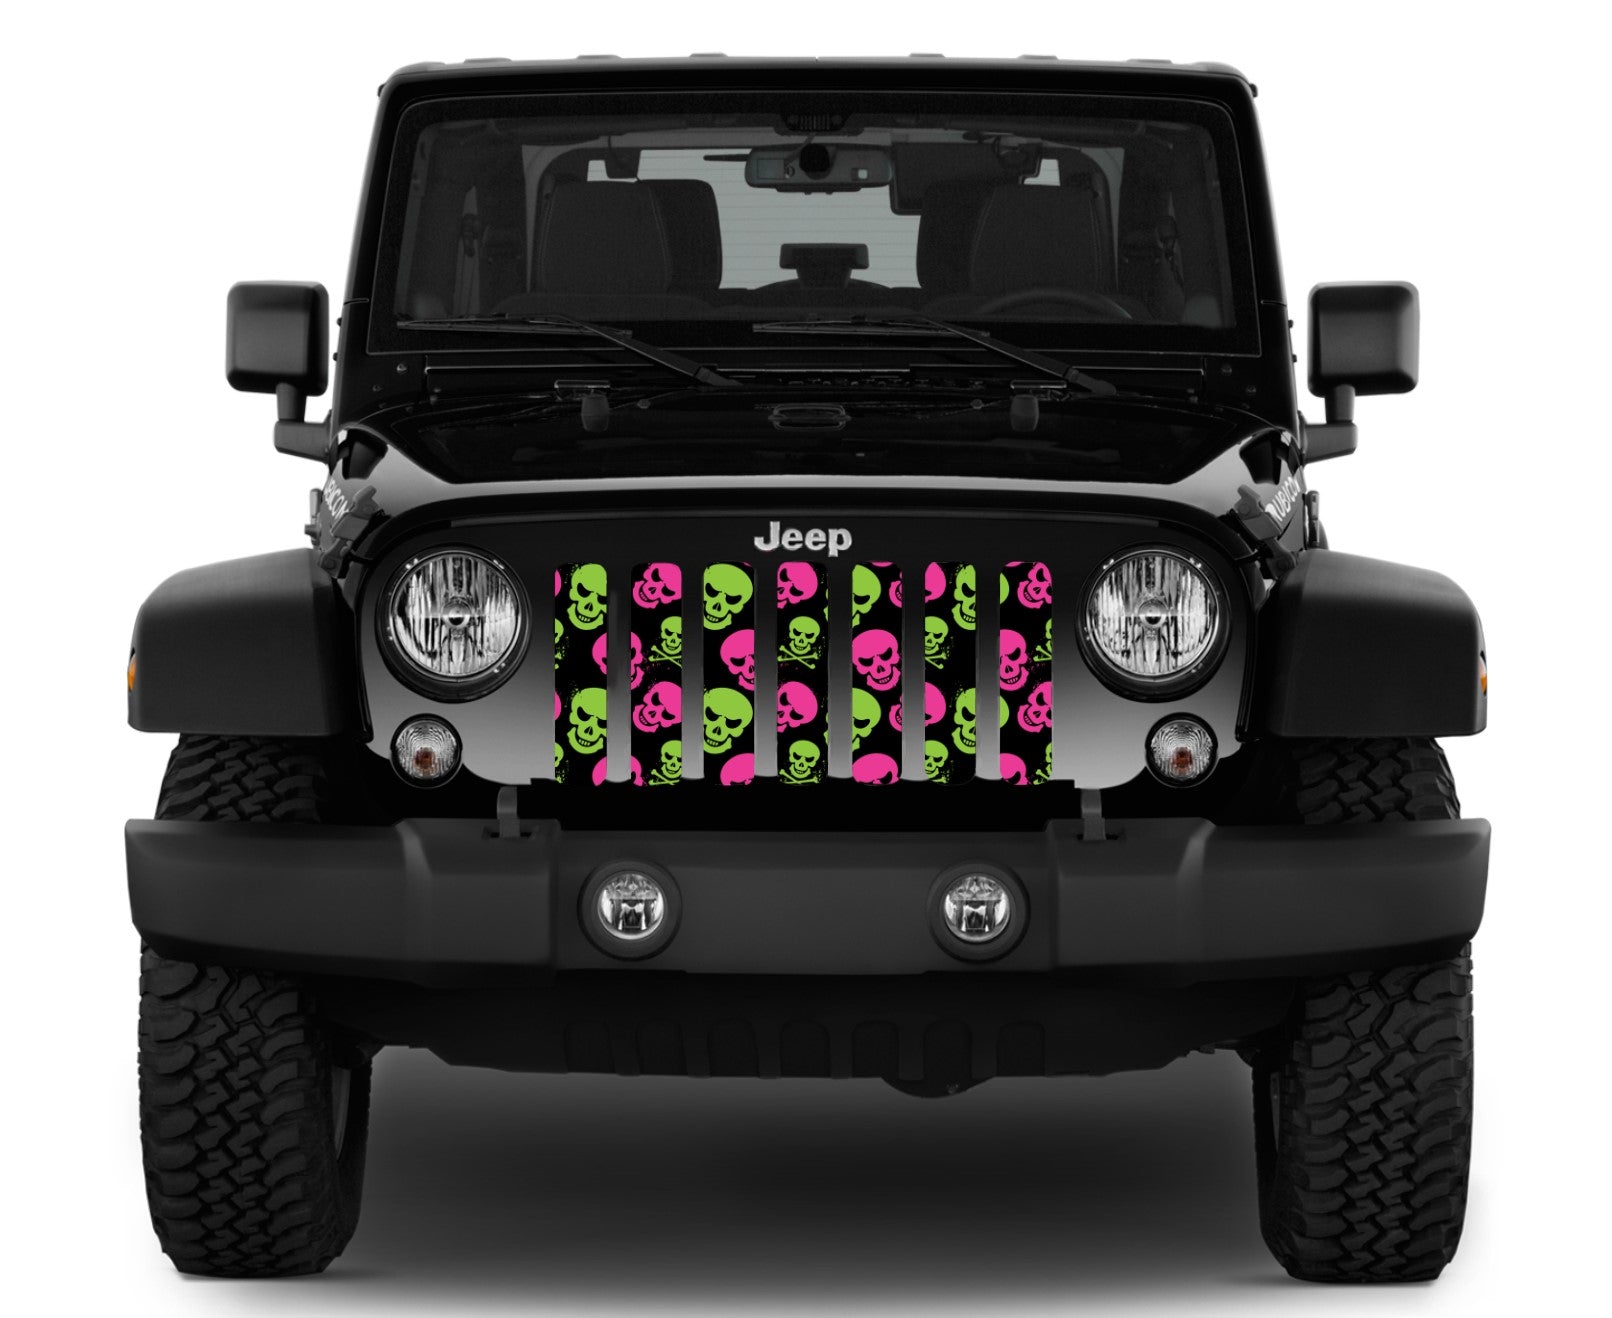 Jeep Wrangler Skulls (Pink and Green) Grille Insert | Dirty Acres